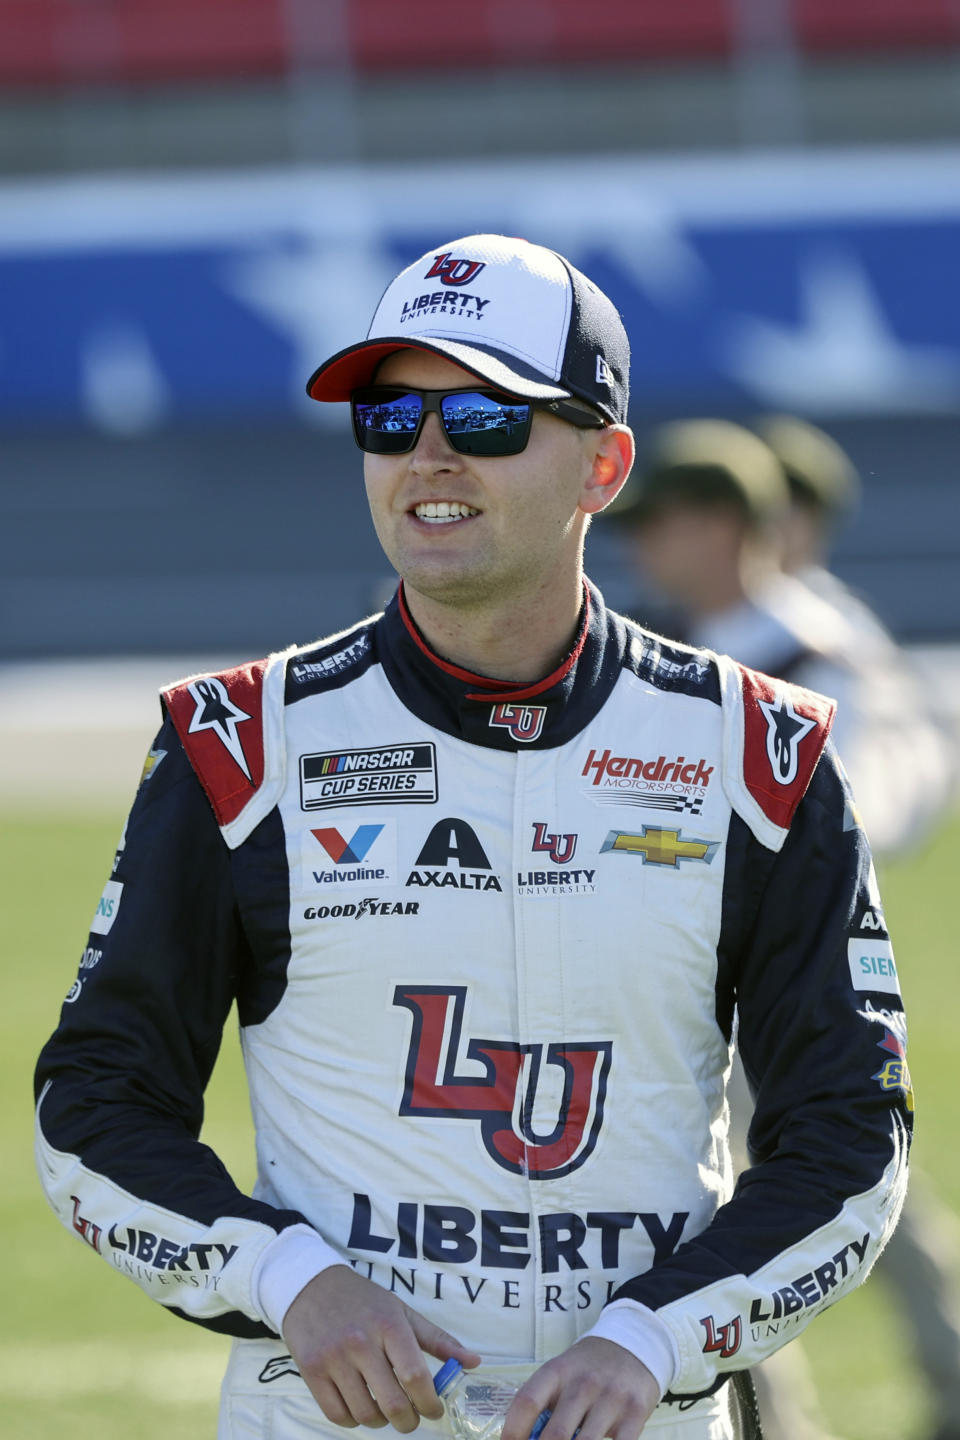 FILE - NASCAR Cup Series driver William Byron walks to his car before a NASCAR Cup Series auto race at Charlotte Motor Speedway in Concord, N.C., in this Sunday, May 30, 2021, file photo. Liberty University has reached a five-year extension with Hendrick Motorsports to continue as a primary sponsor for William Byron. Byron is a junior pursuing a degree in strategic communication through Liberty University’s online program.(AP Photo/Nell Redmond, File)